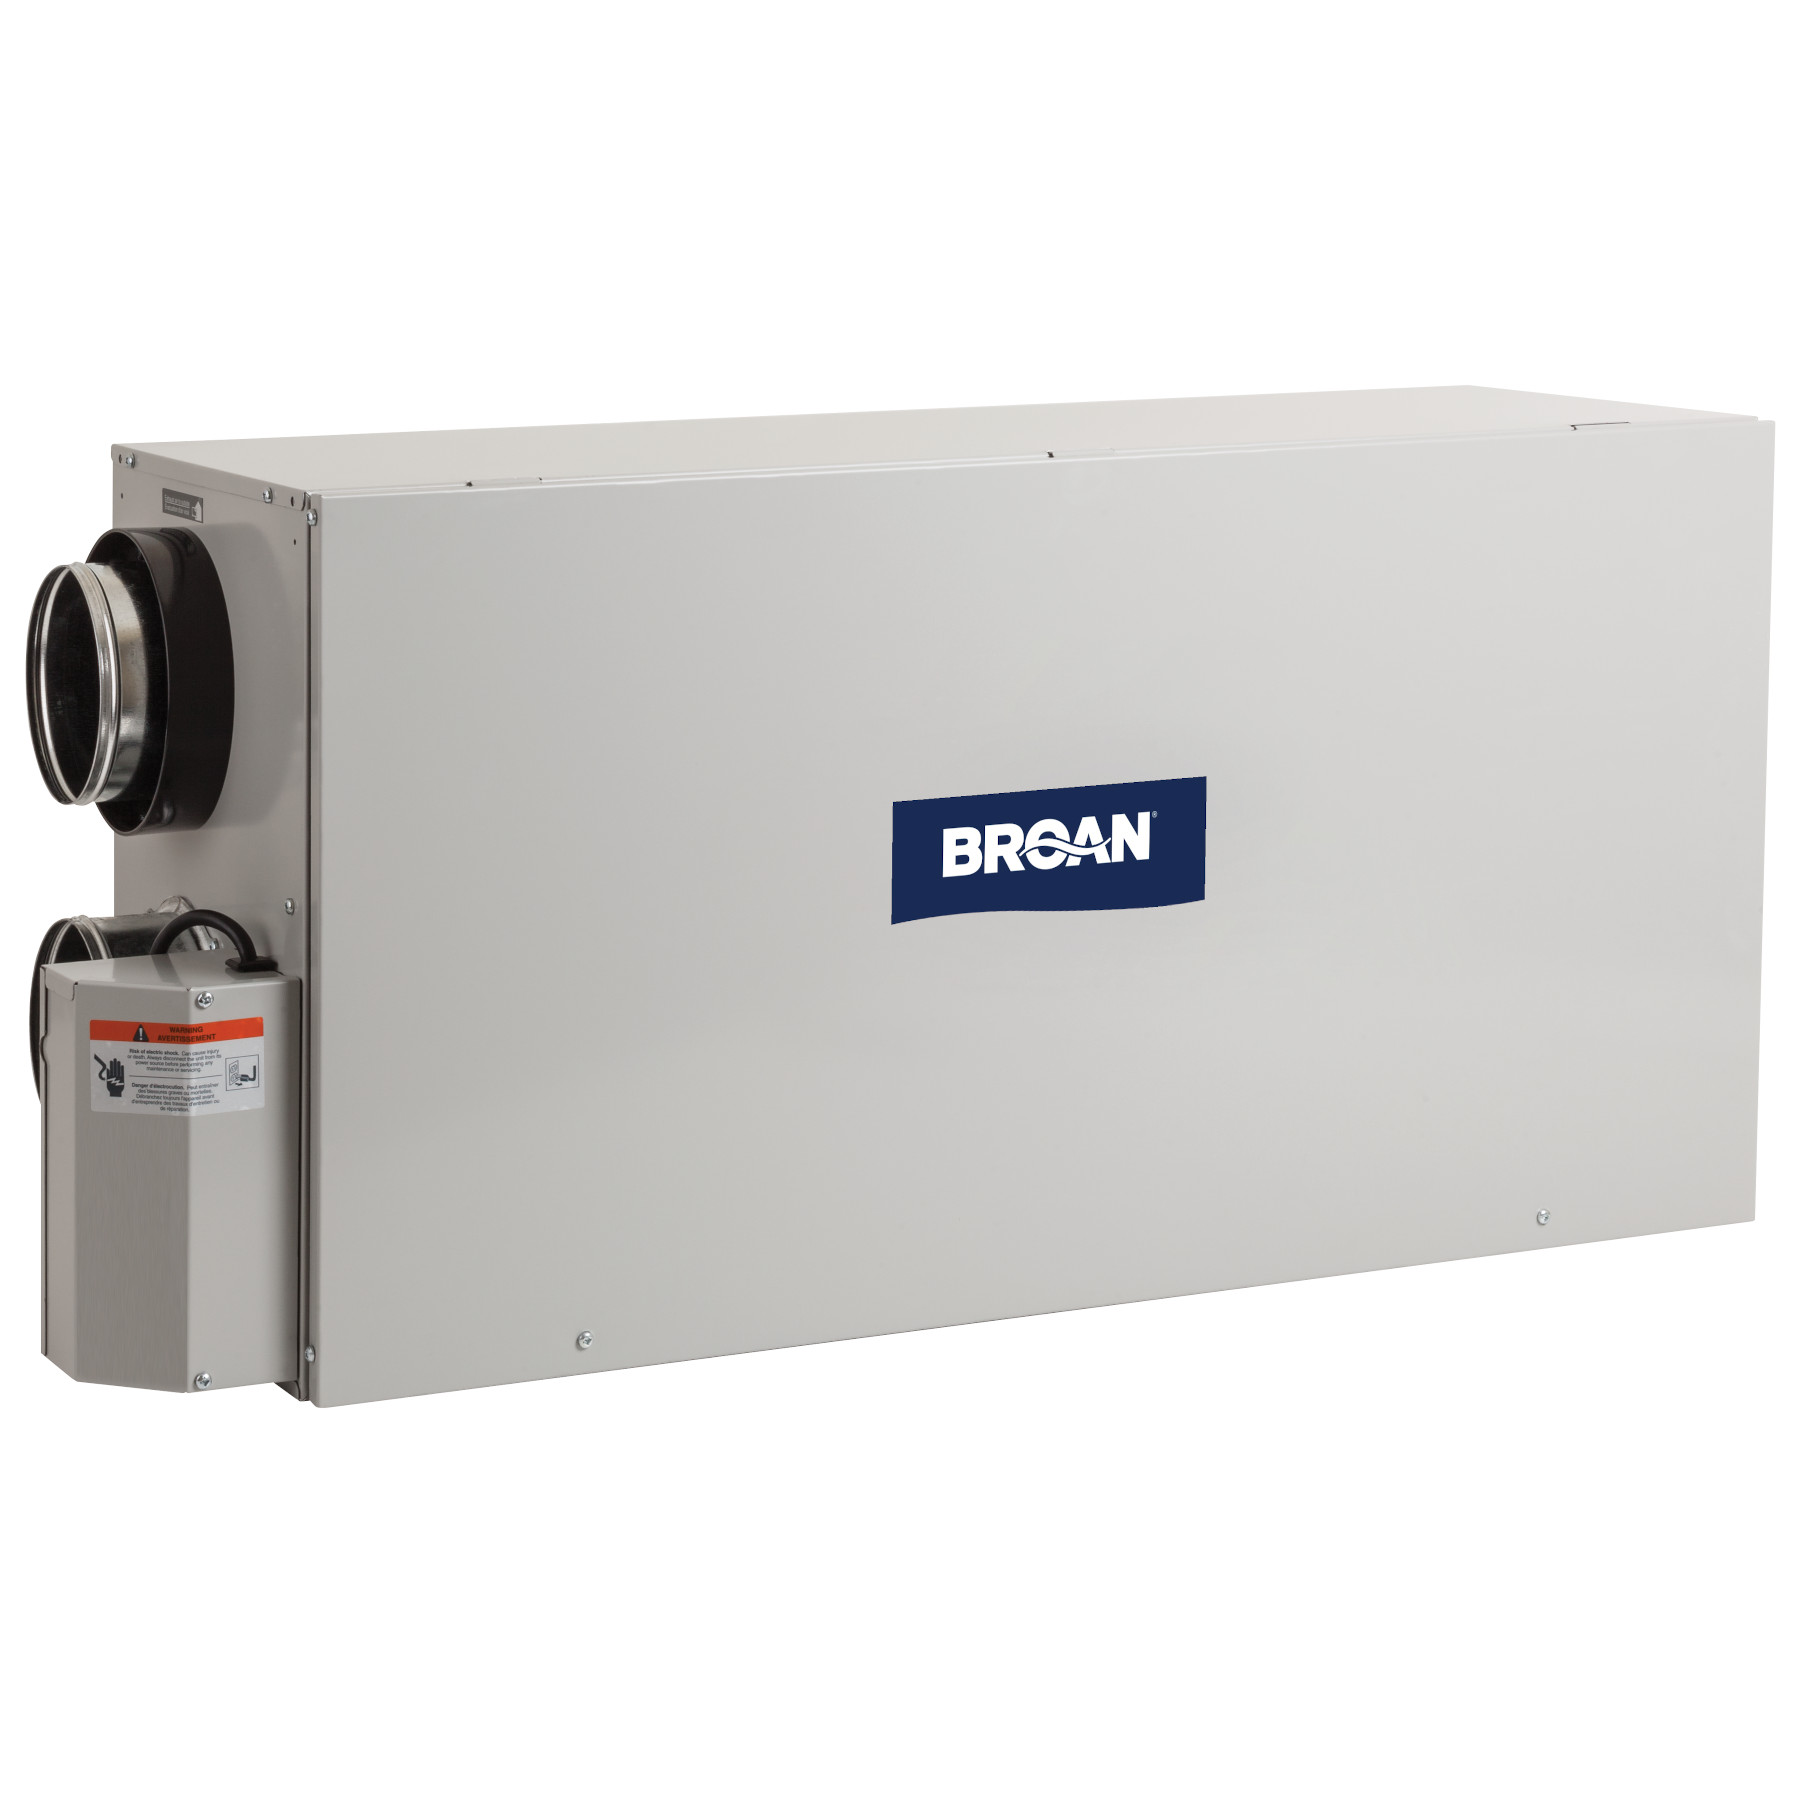 Broan® Advanced Series High Efficiency Heat Recovery Ventilator, 104 CFM at 0.4 in. w.g.